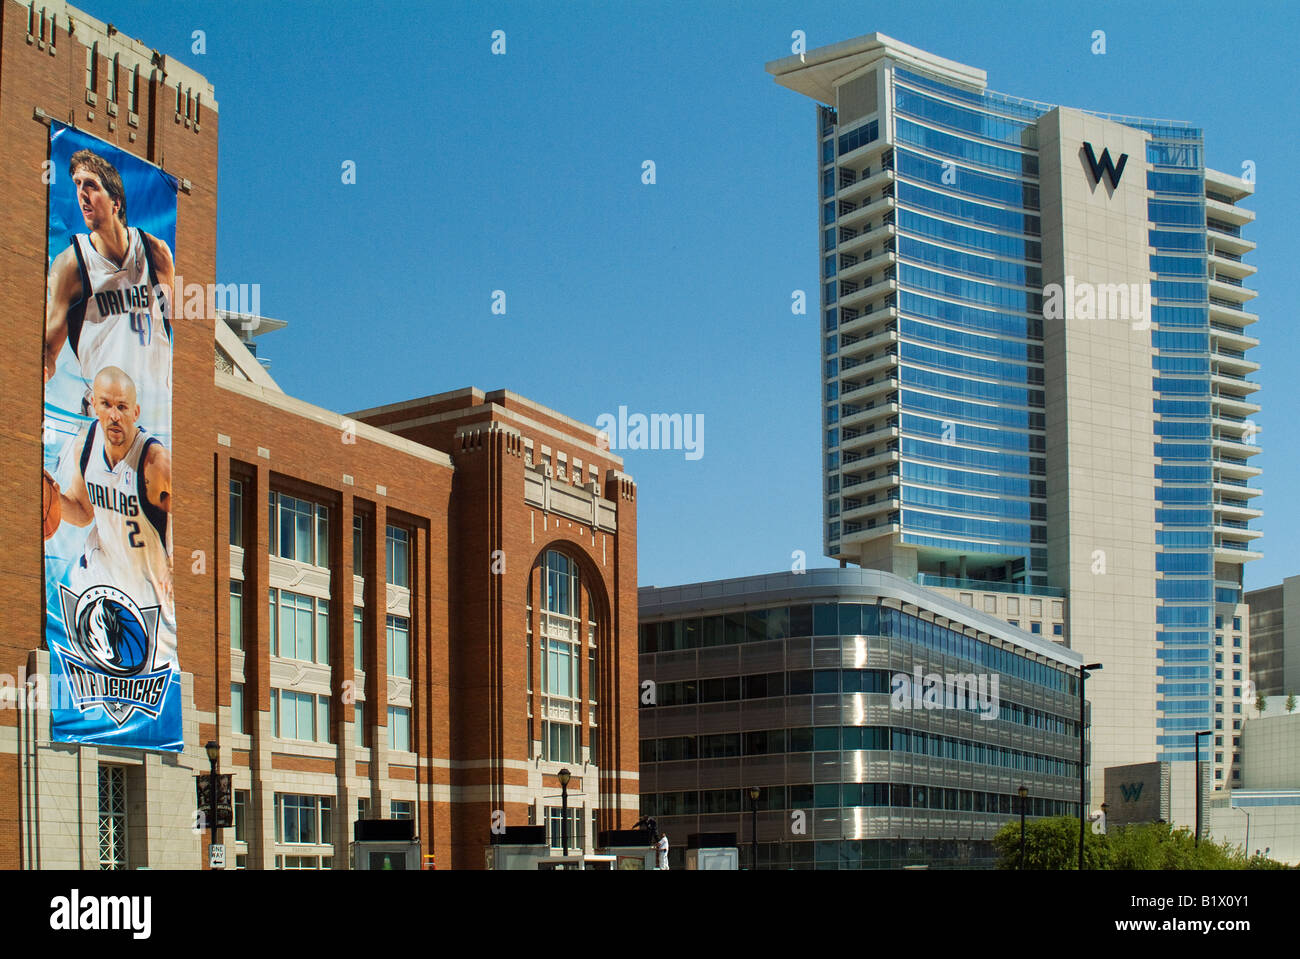 Outside Banner of Dirk Nowitzki at American Airline Center in Dallas Texas USA Stock Photo